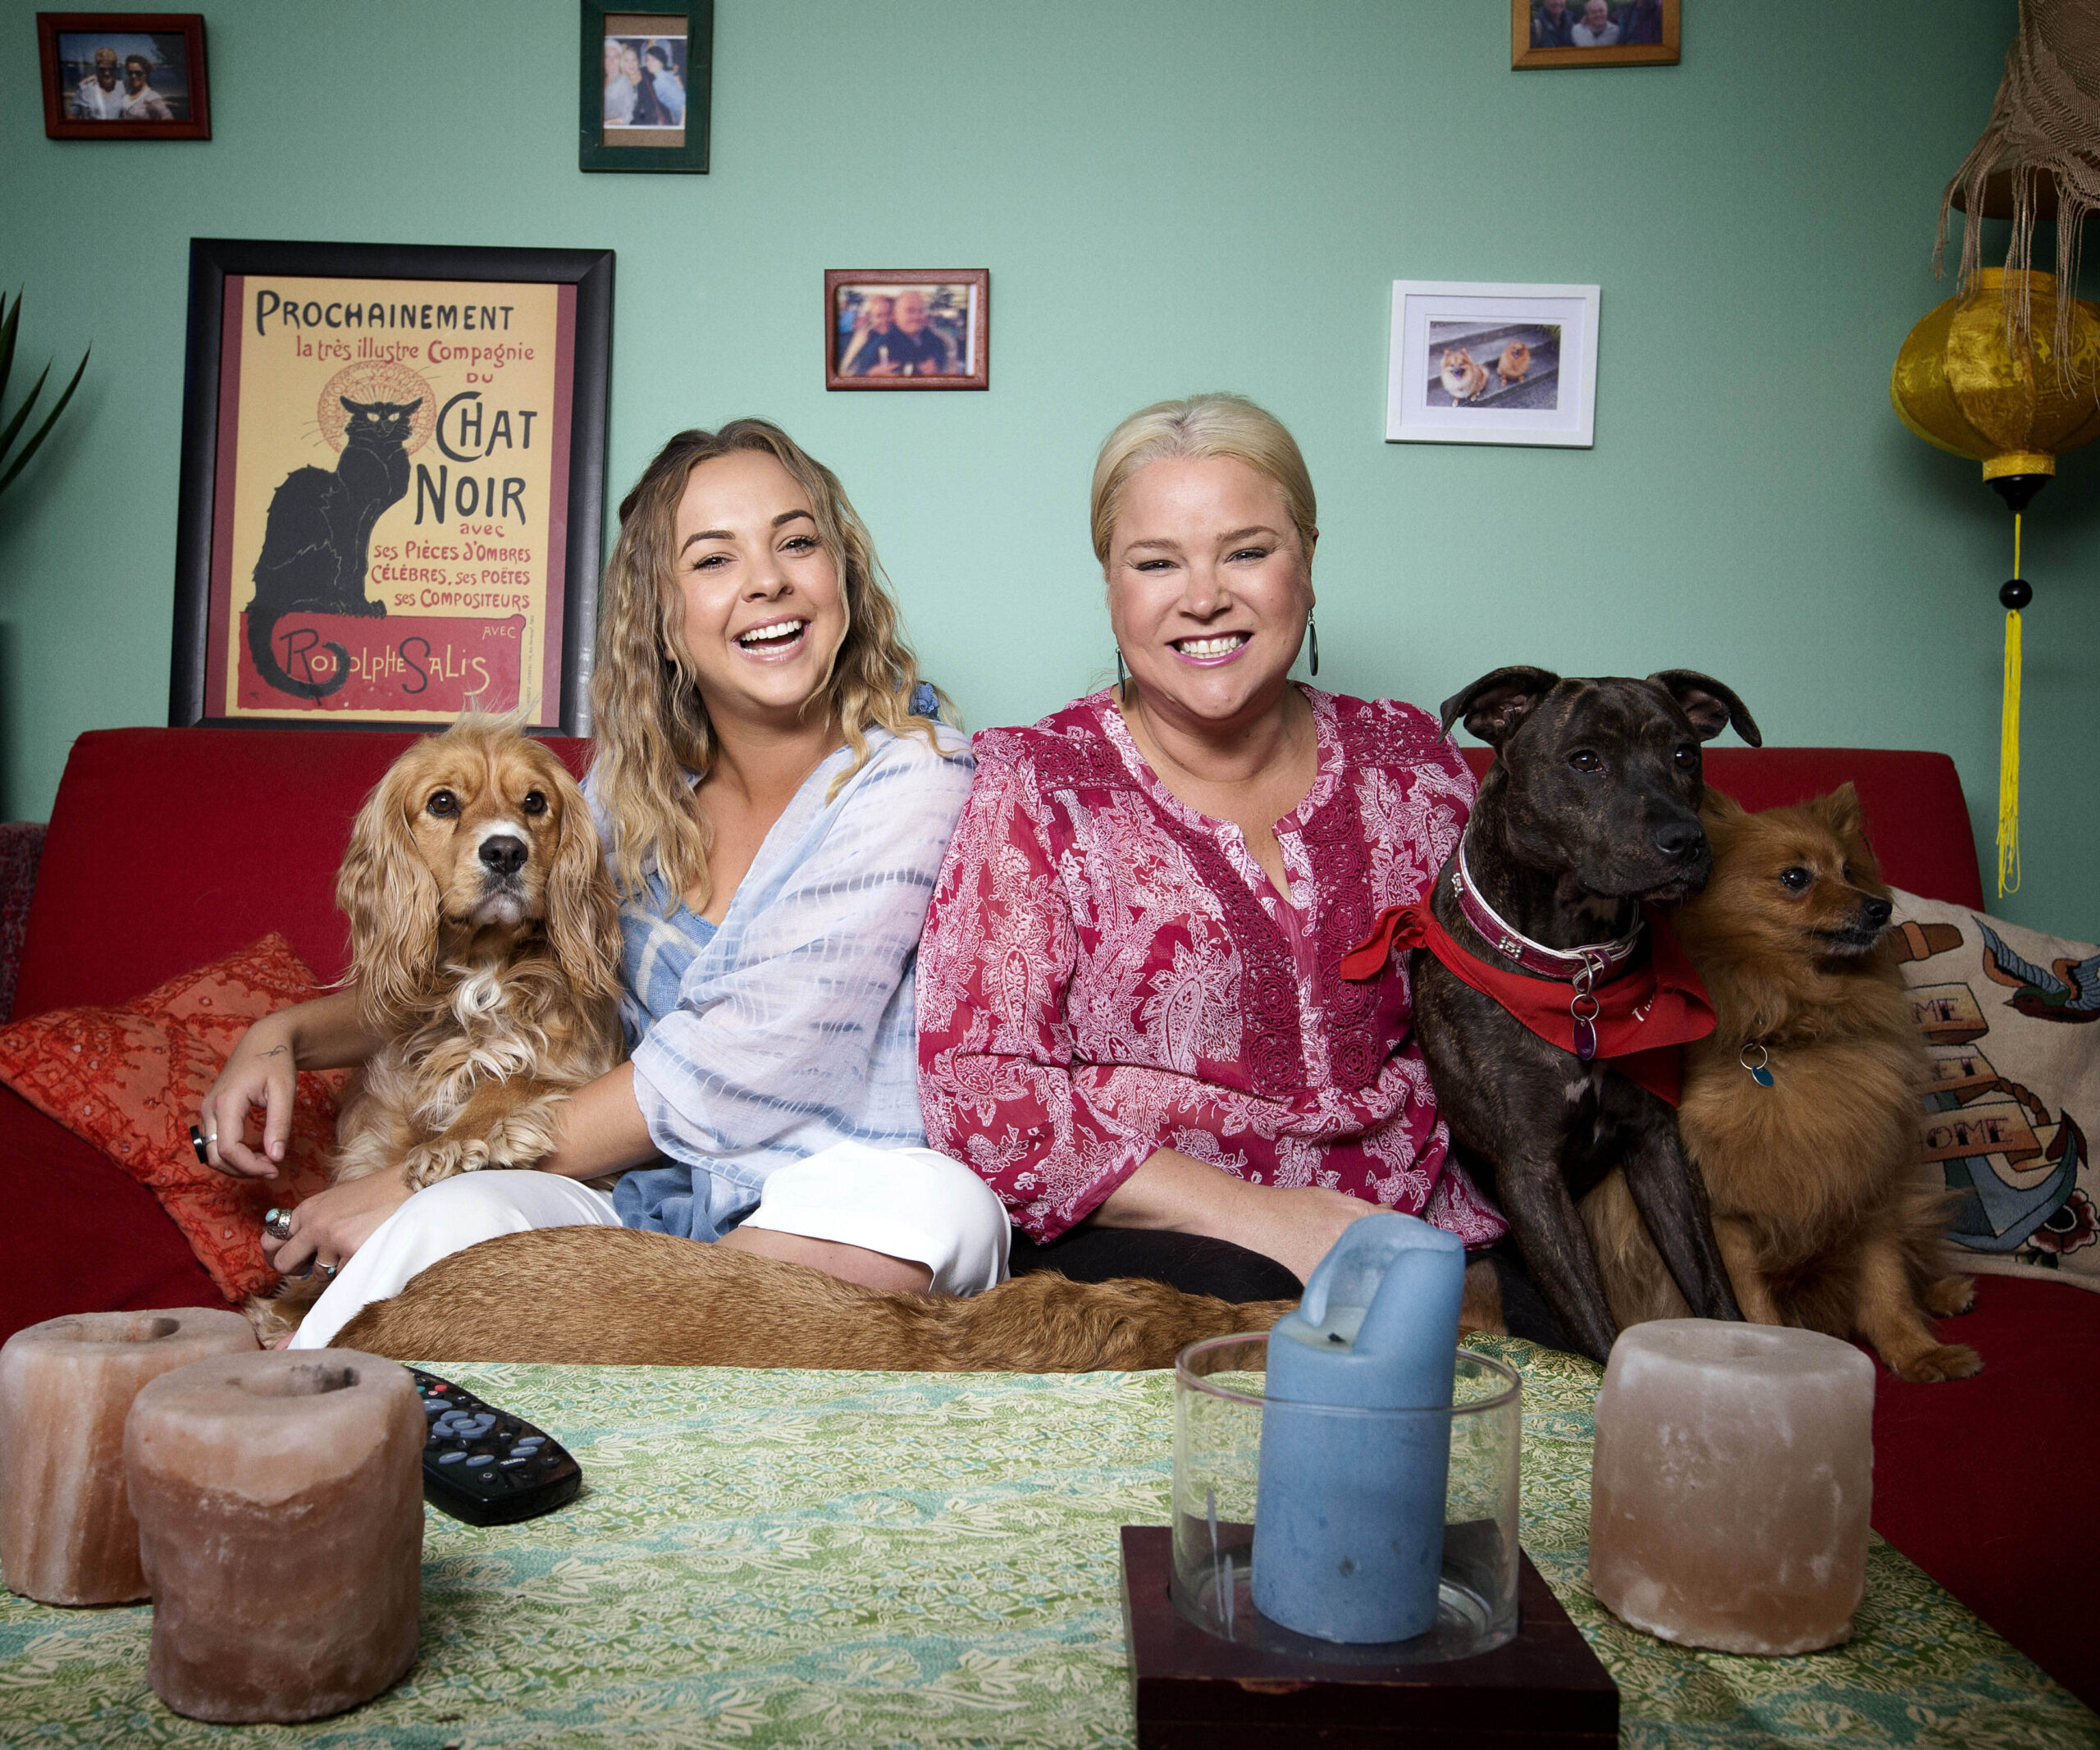 Gogglebox has been renewed for two more seasons!